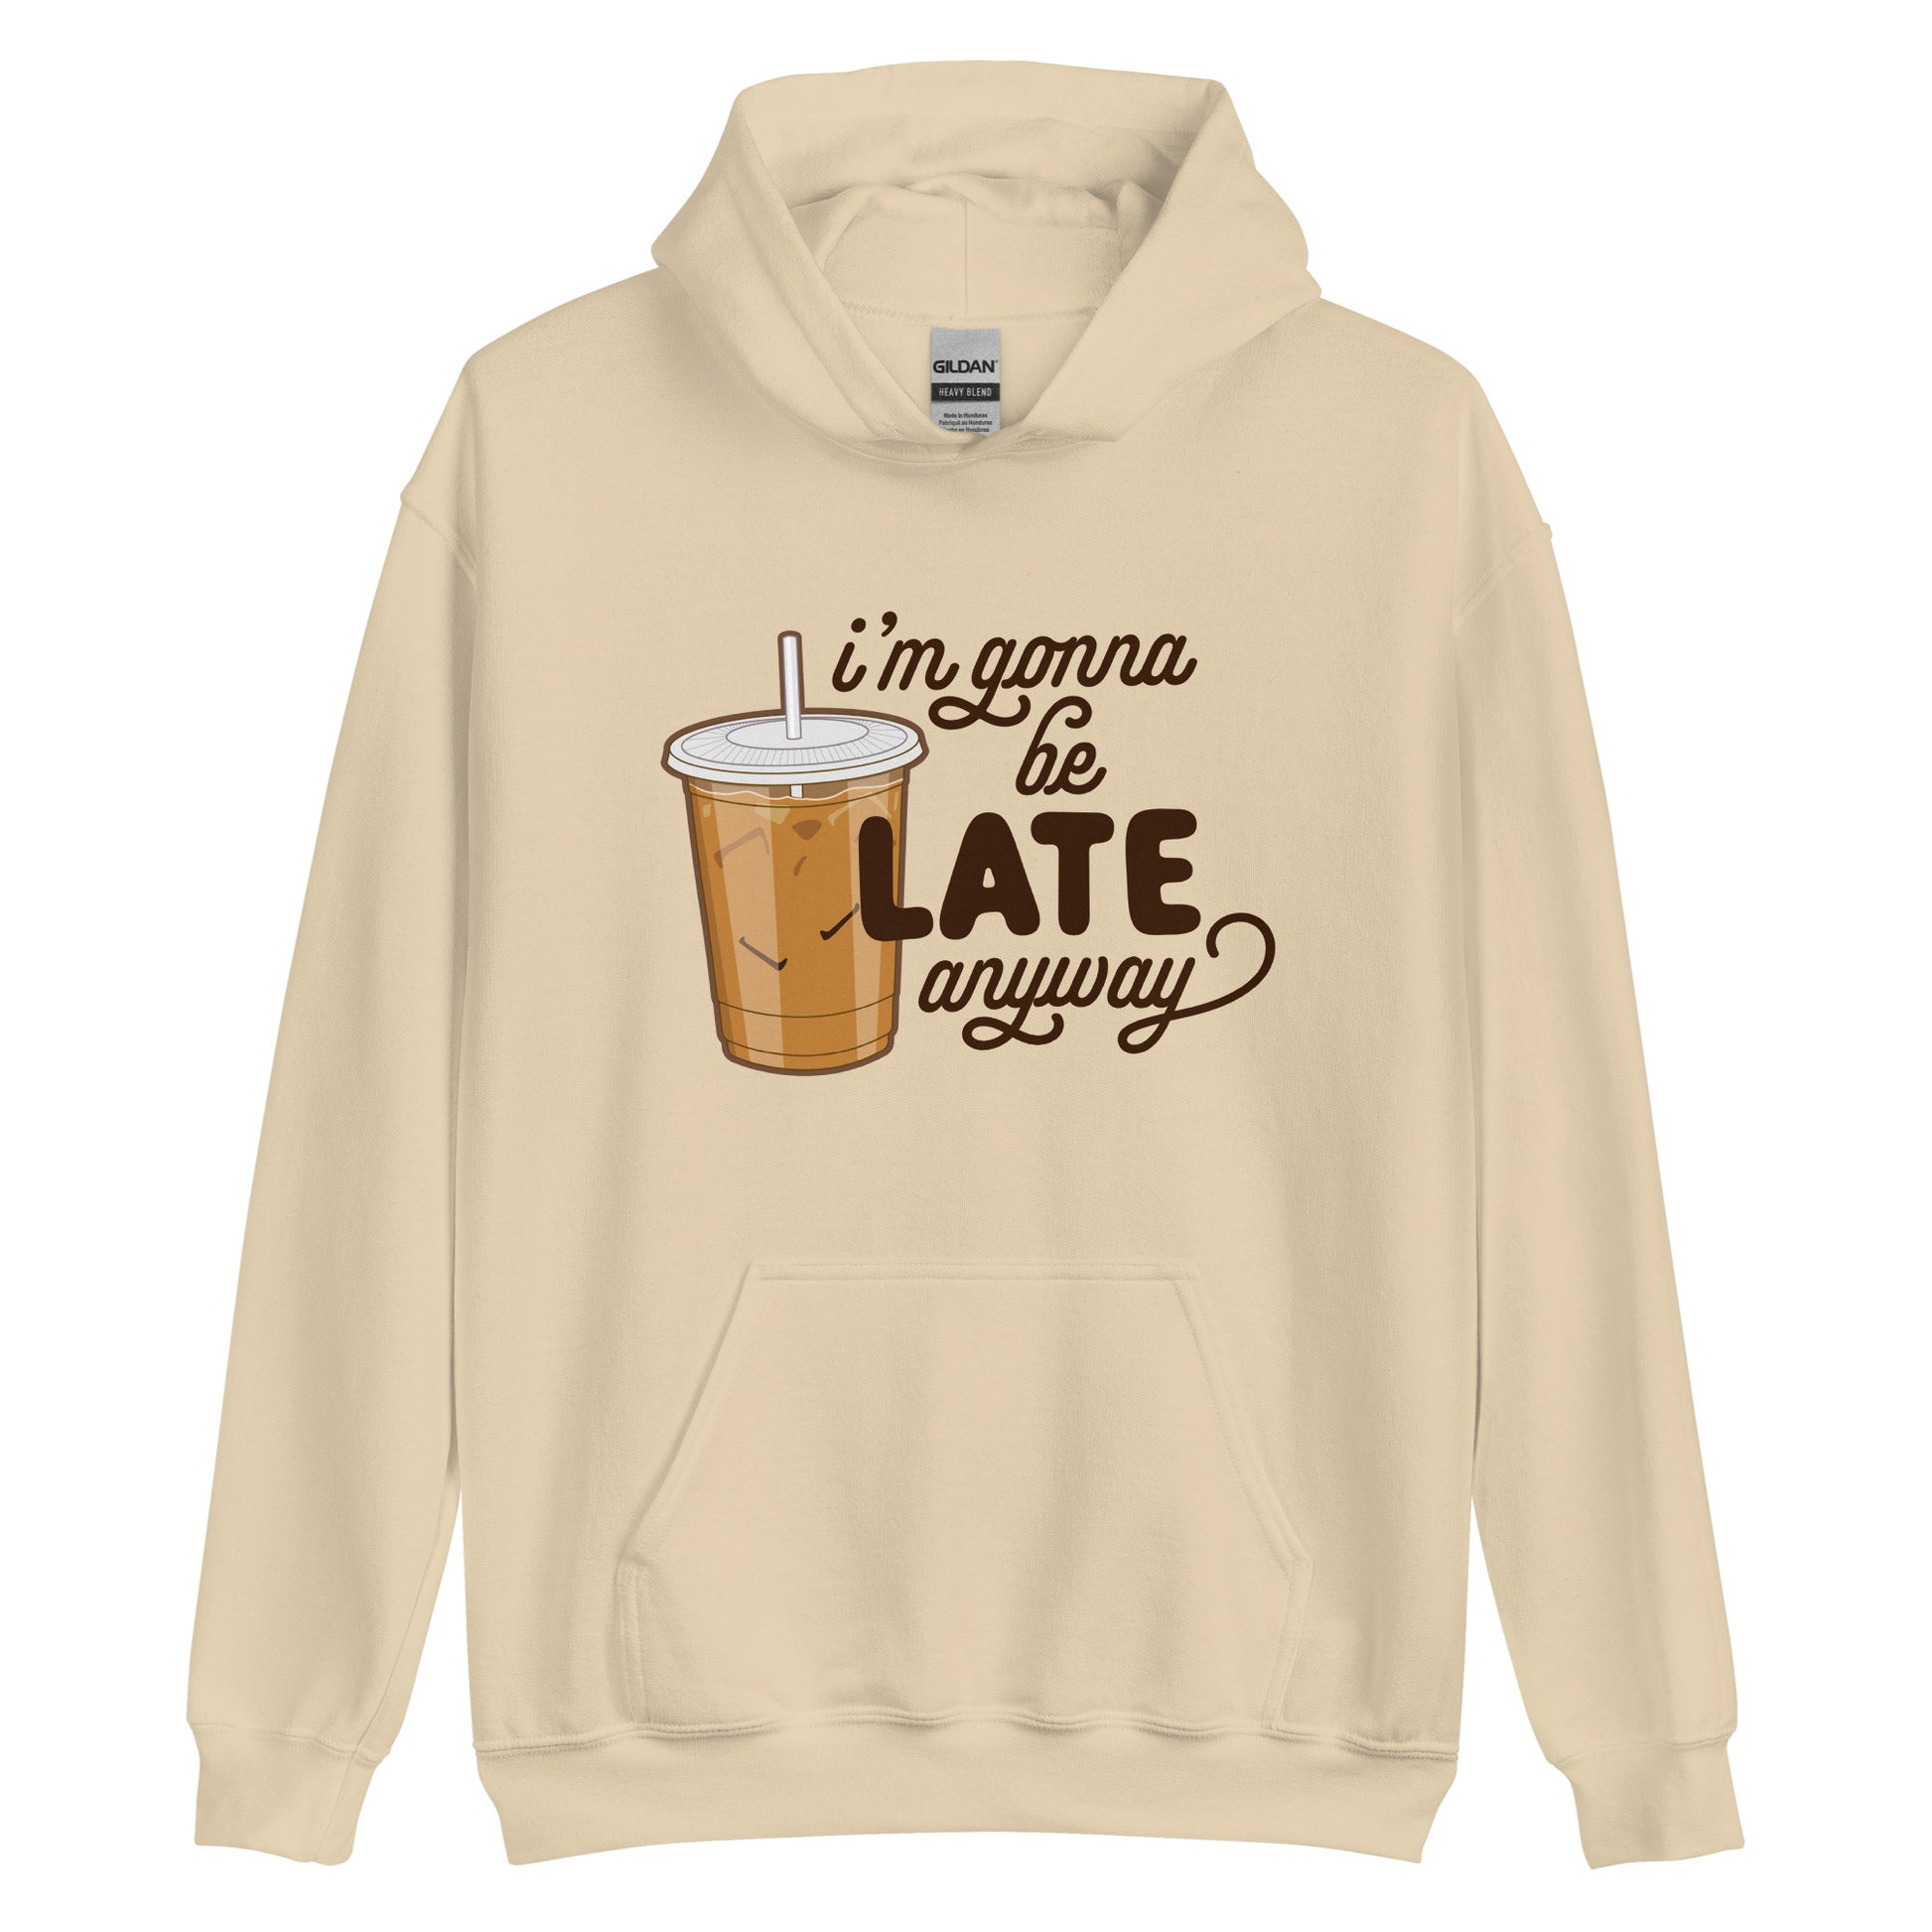 A tan hooded sweatshirt featuring an illustration of iced coffee. Text next to the coffee reads "I'm gonna be LATE anyway".